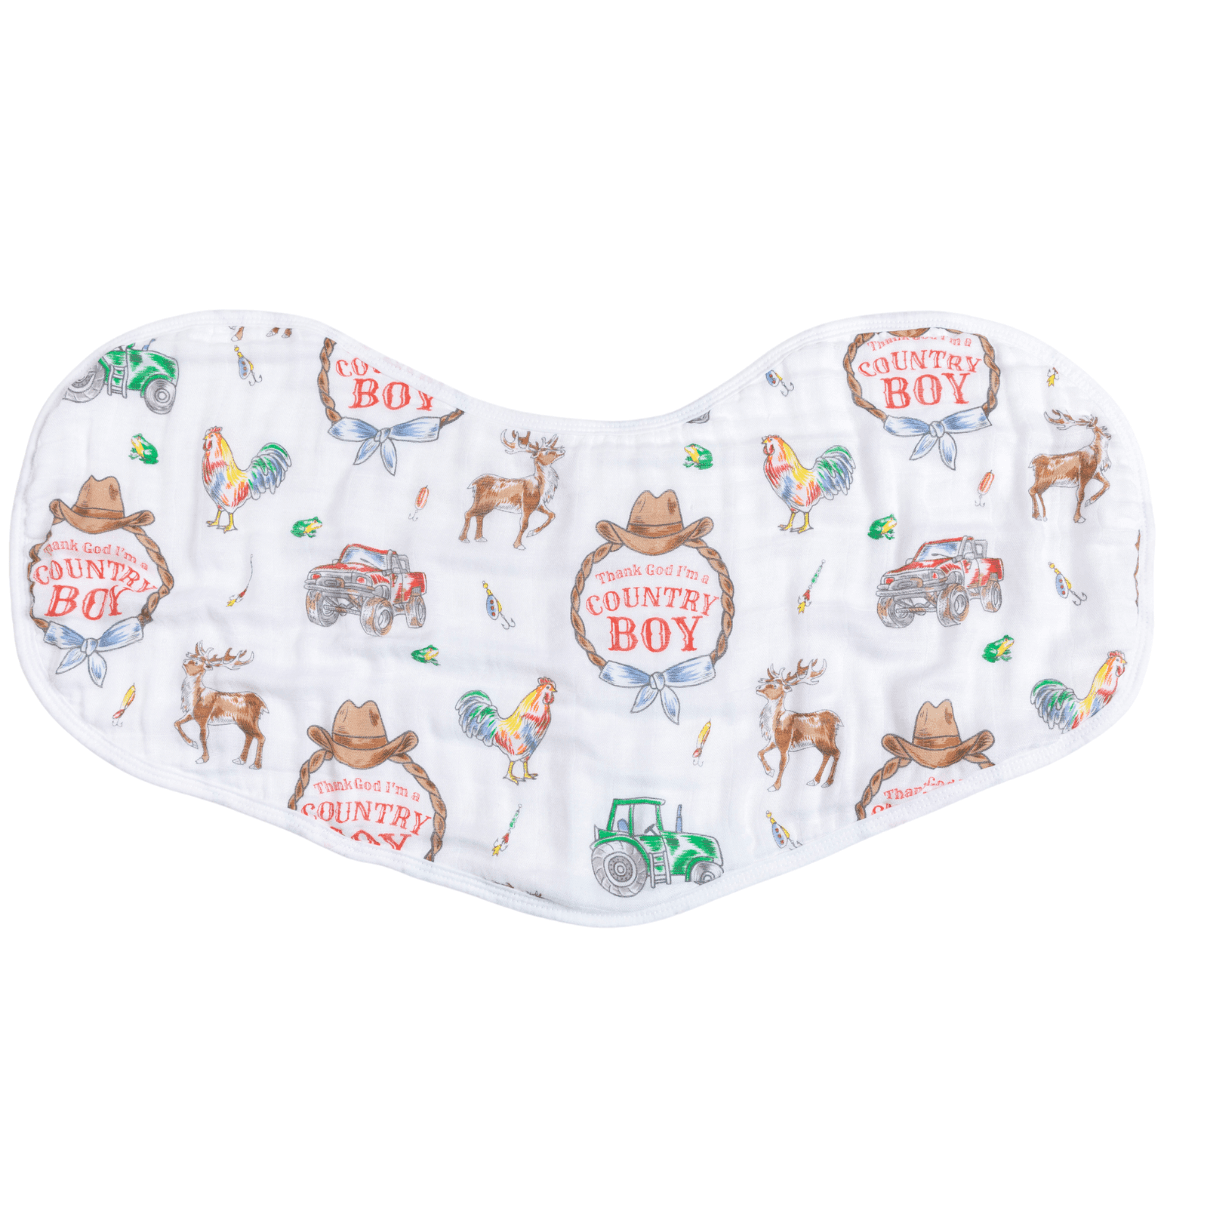 Country Boy baby gift set with a blue swaddle blanket and burp bib, featuring a cute farm animal print.